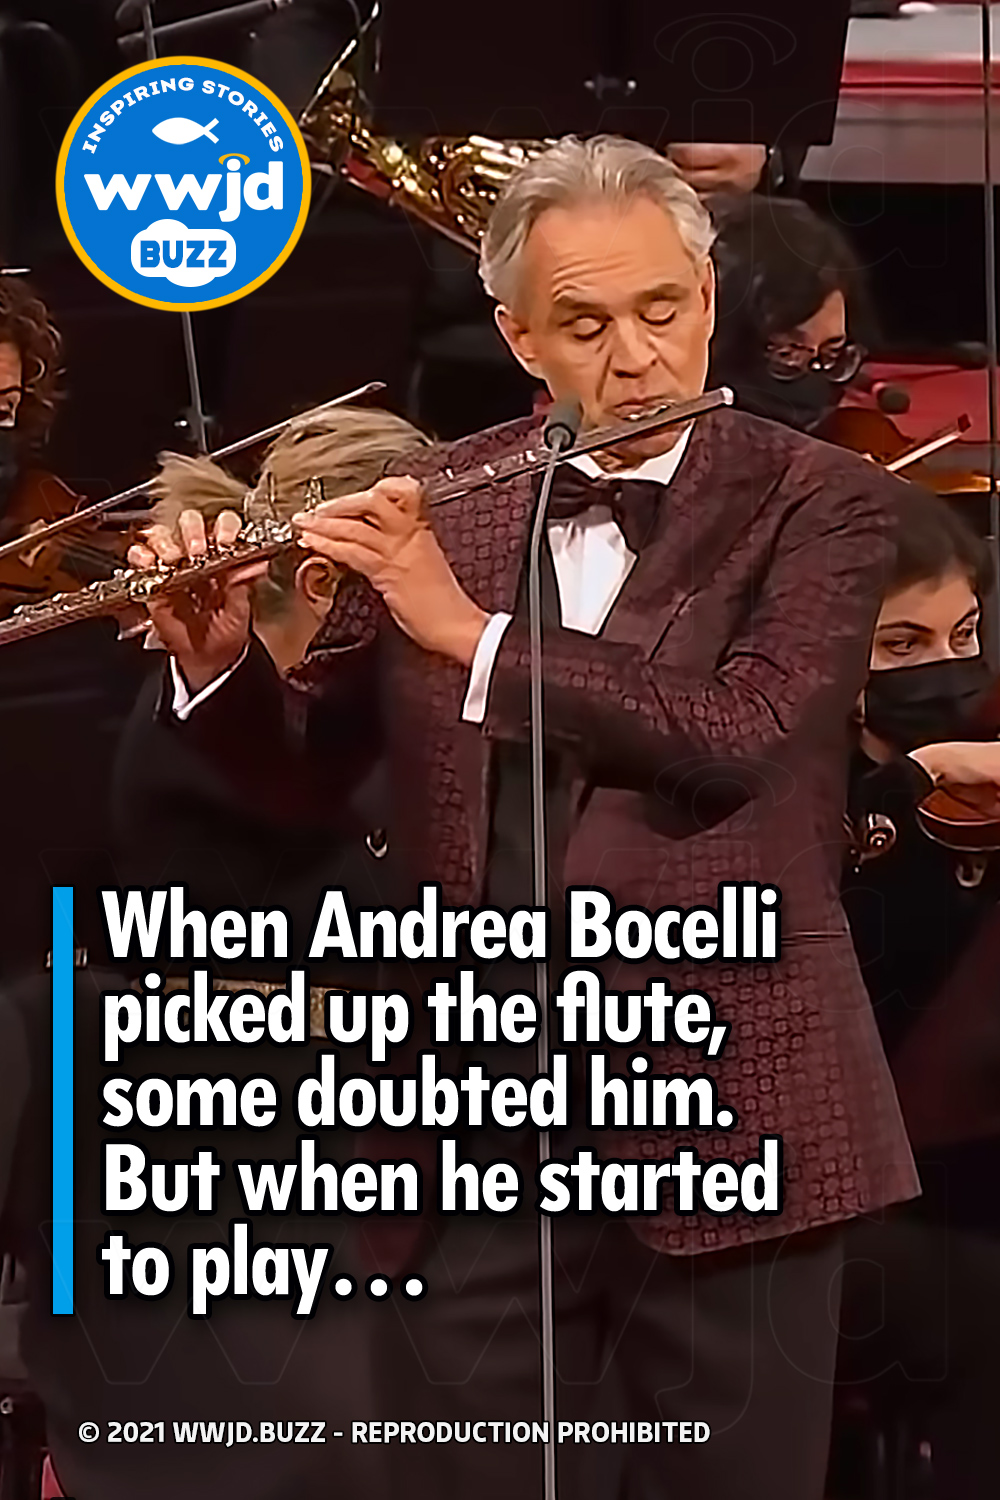 When Andrea Bocelli picked up the flute, some doubted him. But when he started to play...